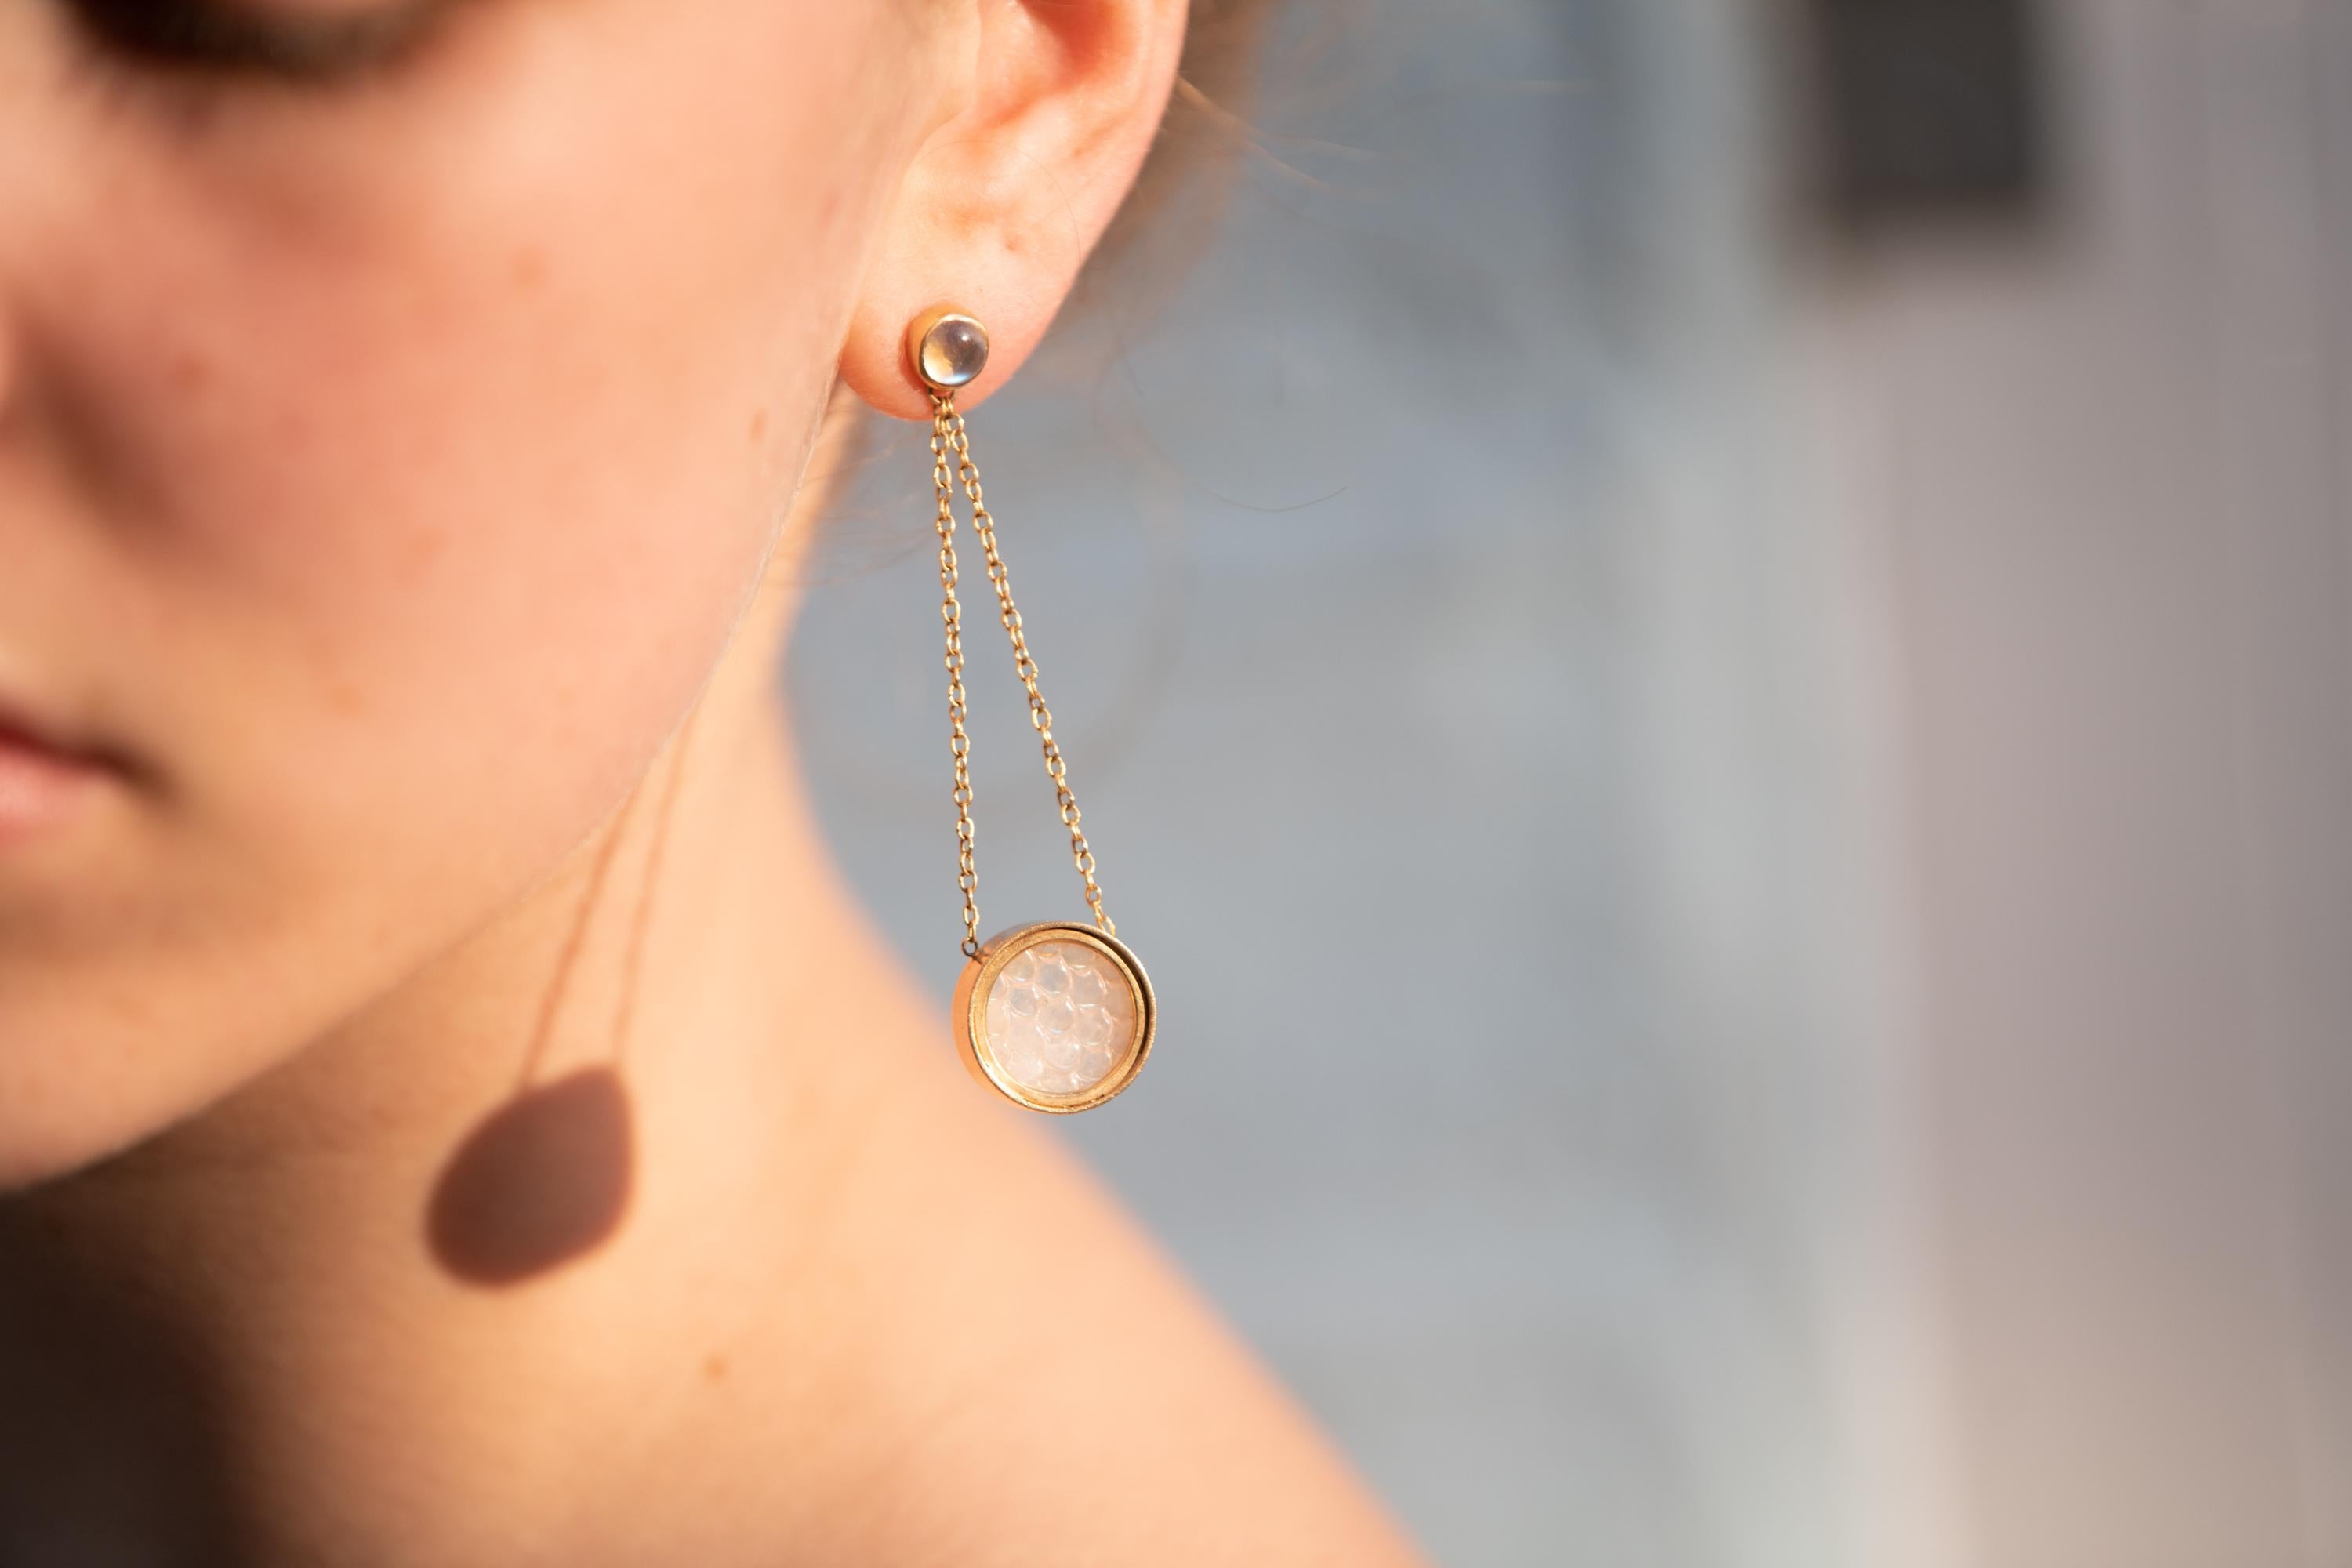 Ouroboros snake scale carved rainbow moonstone pendant earrings with a rainbow moonstone round cabochon stud, handmade in 18 karat gold. 

This piece is made completely by hand and if it is out of stock takes 4 to 6 weeks to produce. 

OUROBOROS is